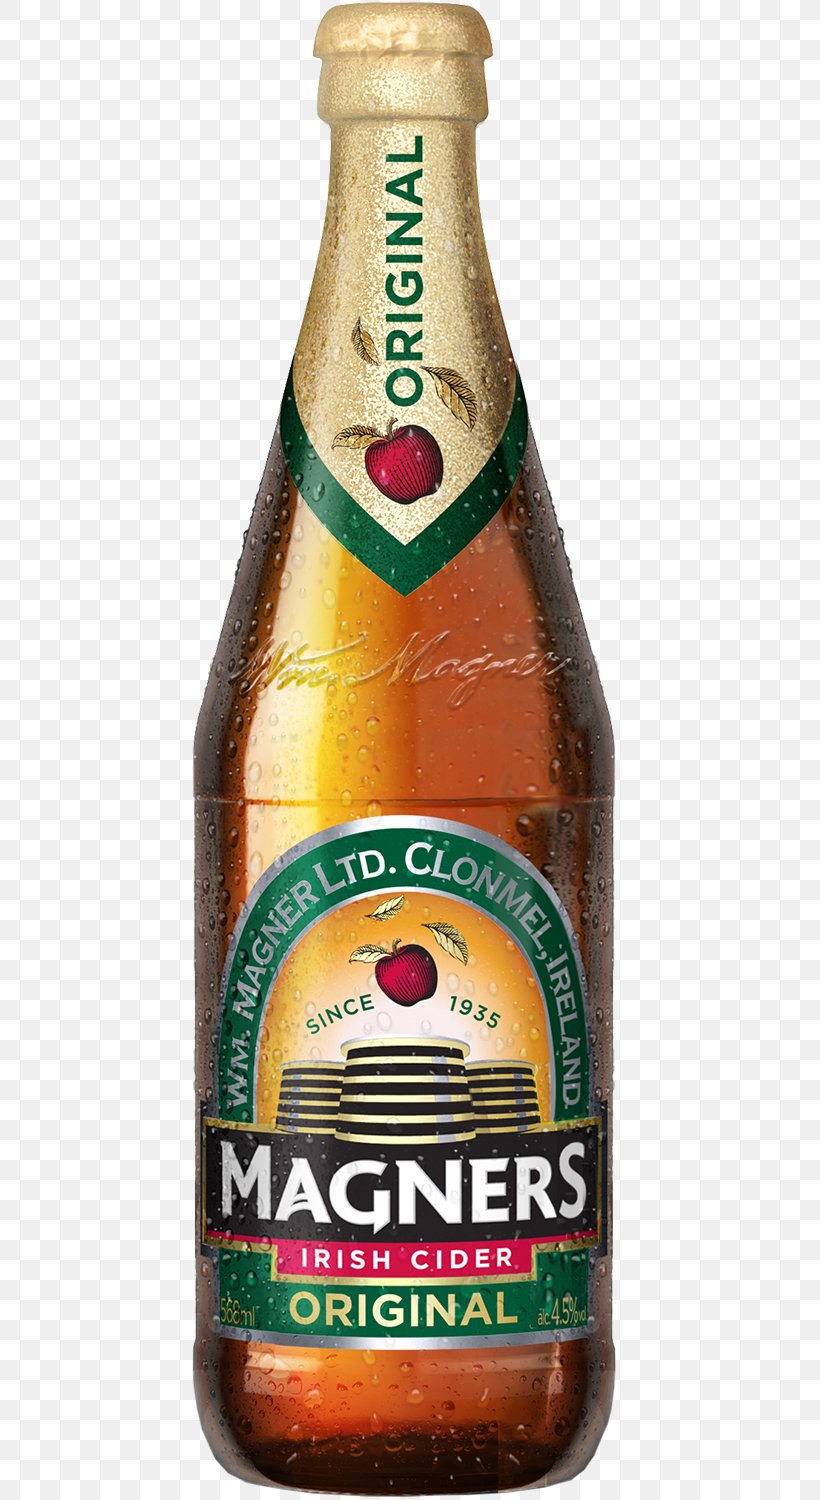 Cider Beer Magners Bulmers Bottle, PNG, 600x1500px, Cider, Alcoholic Beverages, Beer, Beer Bottle, Bottle Download Free